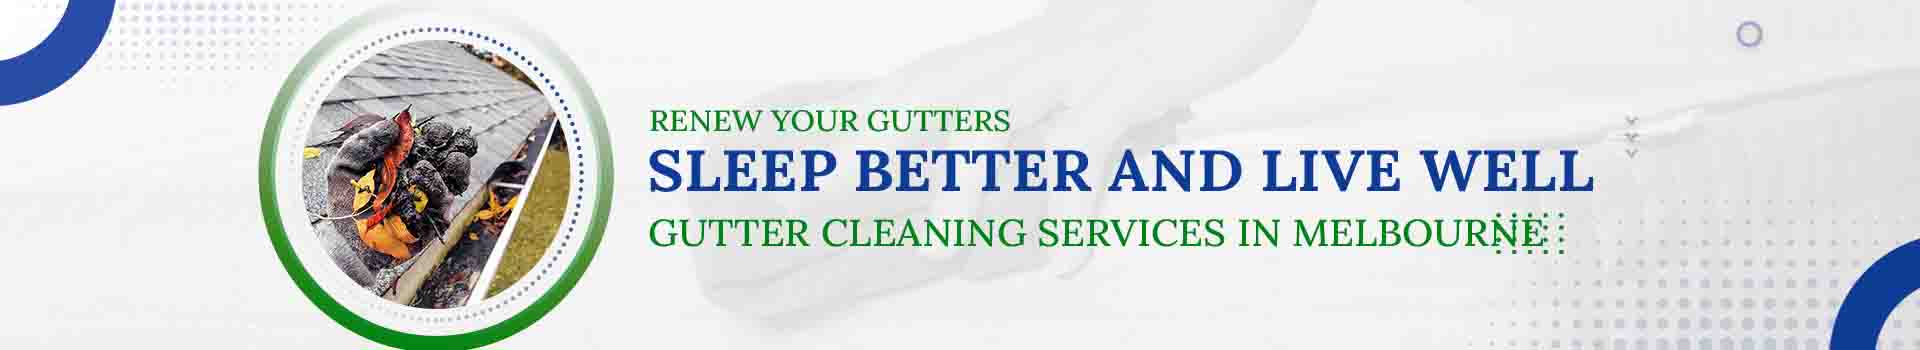 banner of gutter cleaning service in melbourne